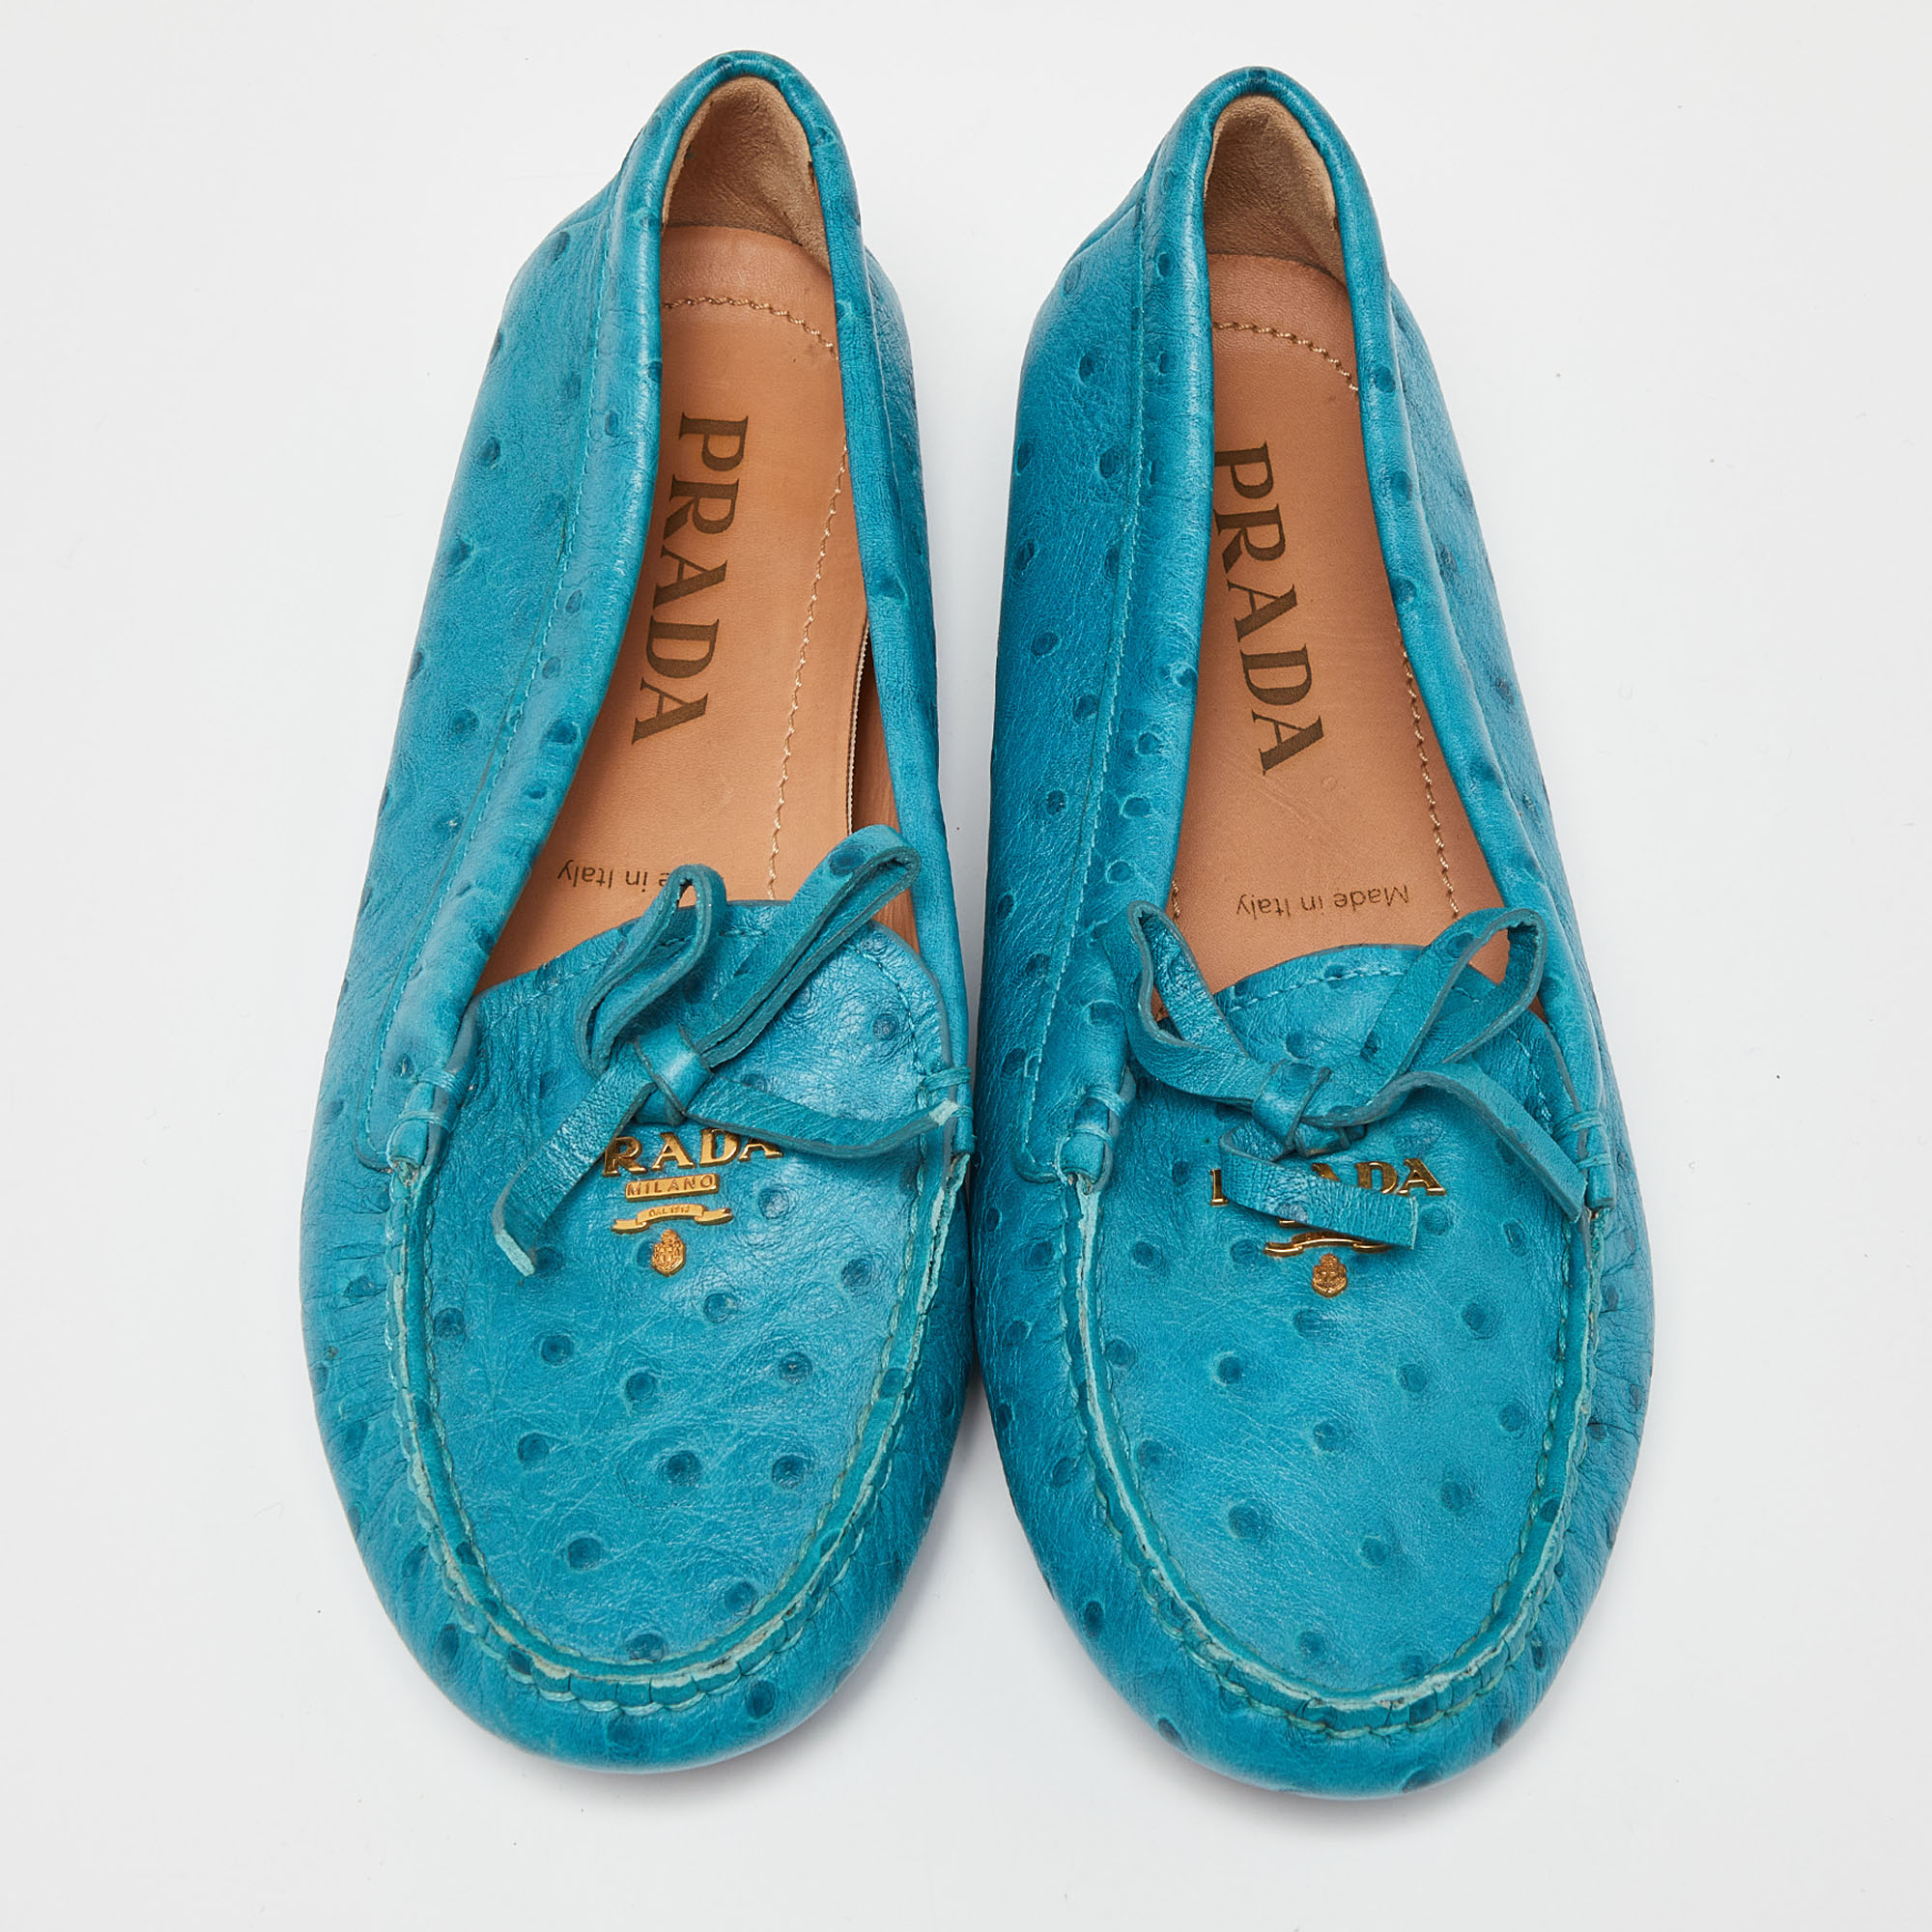 Prada Blue Embossed Ostrich Bow Slip On Loafers Size 36